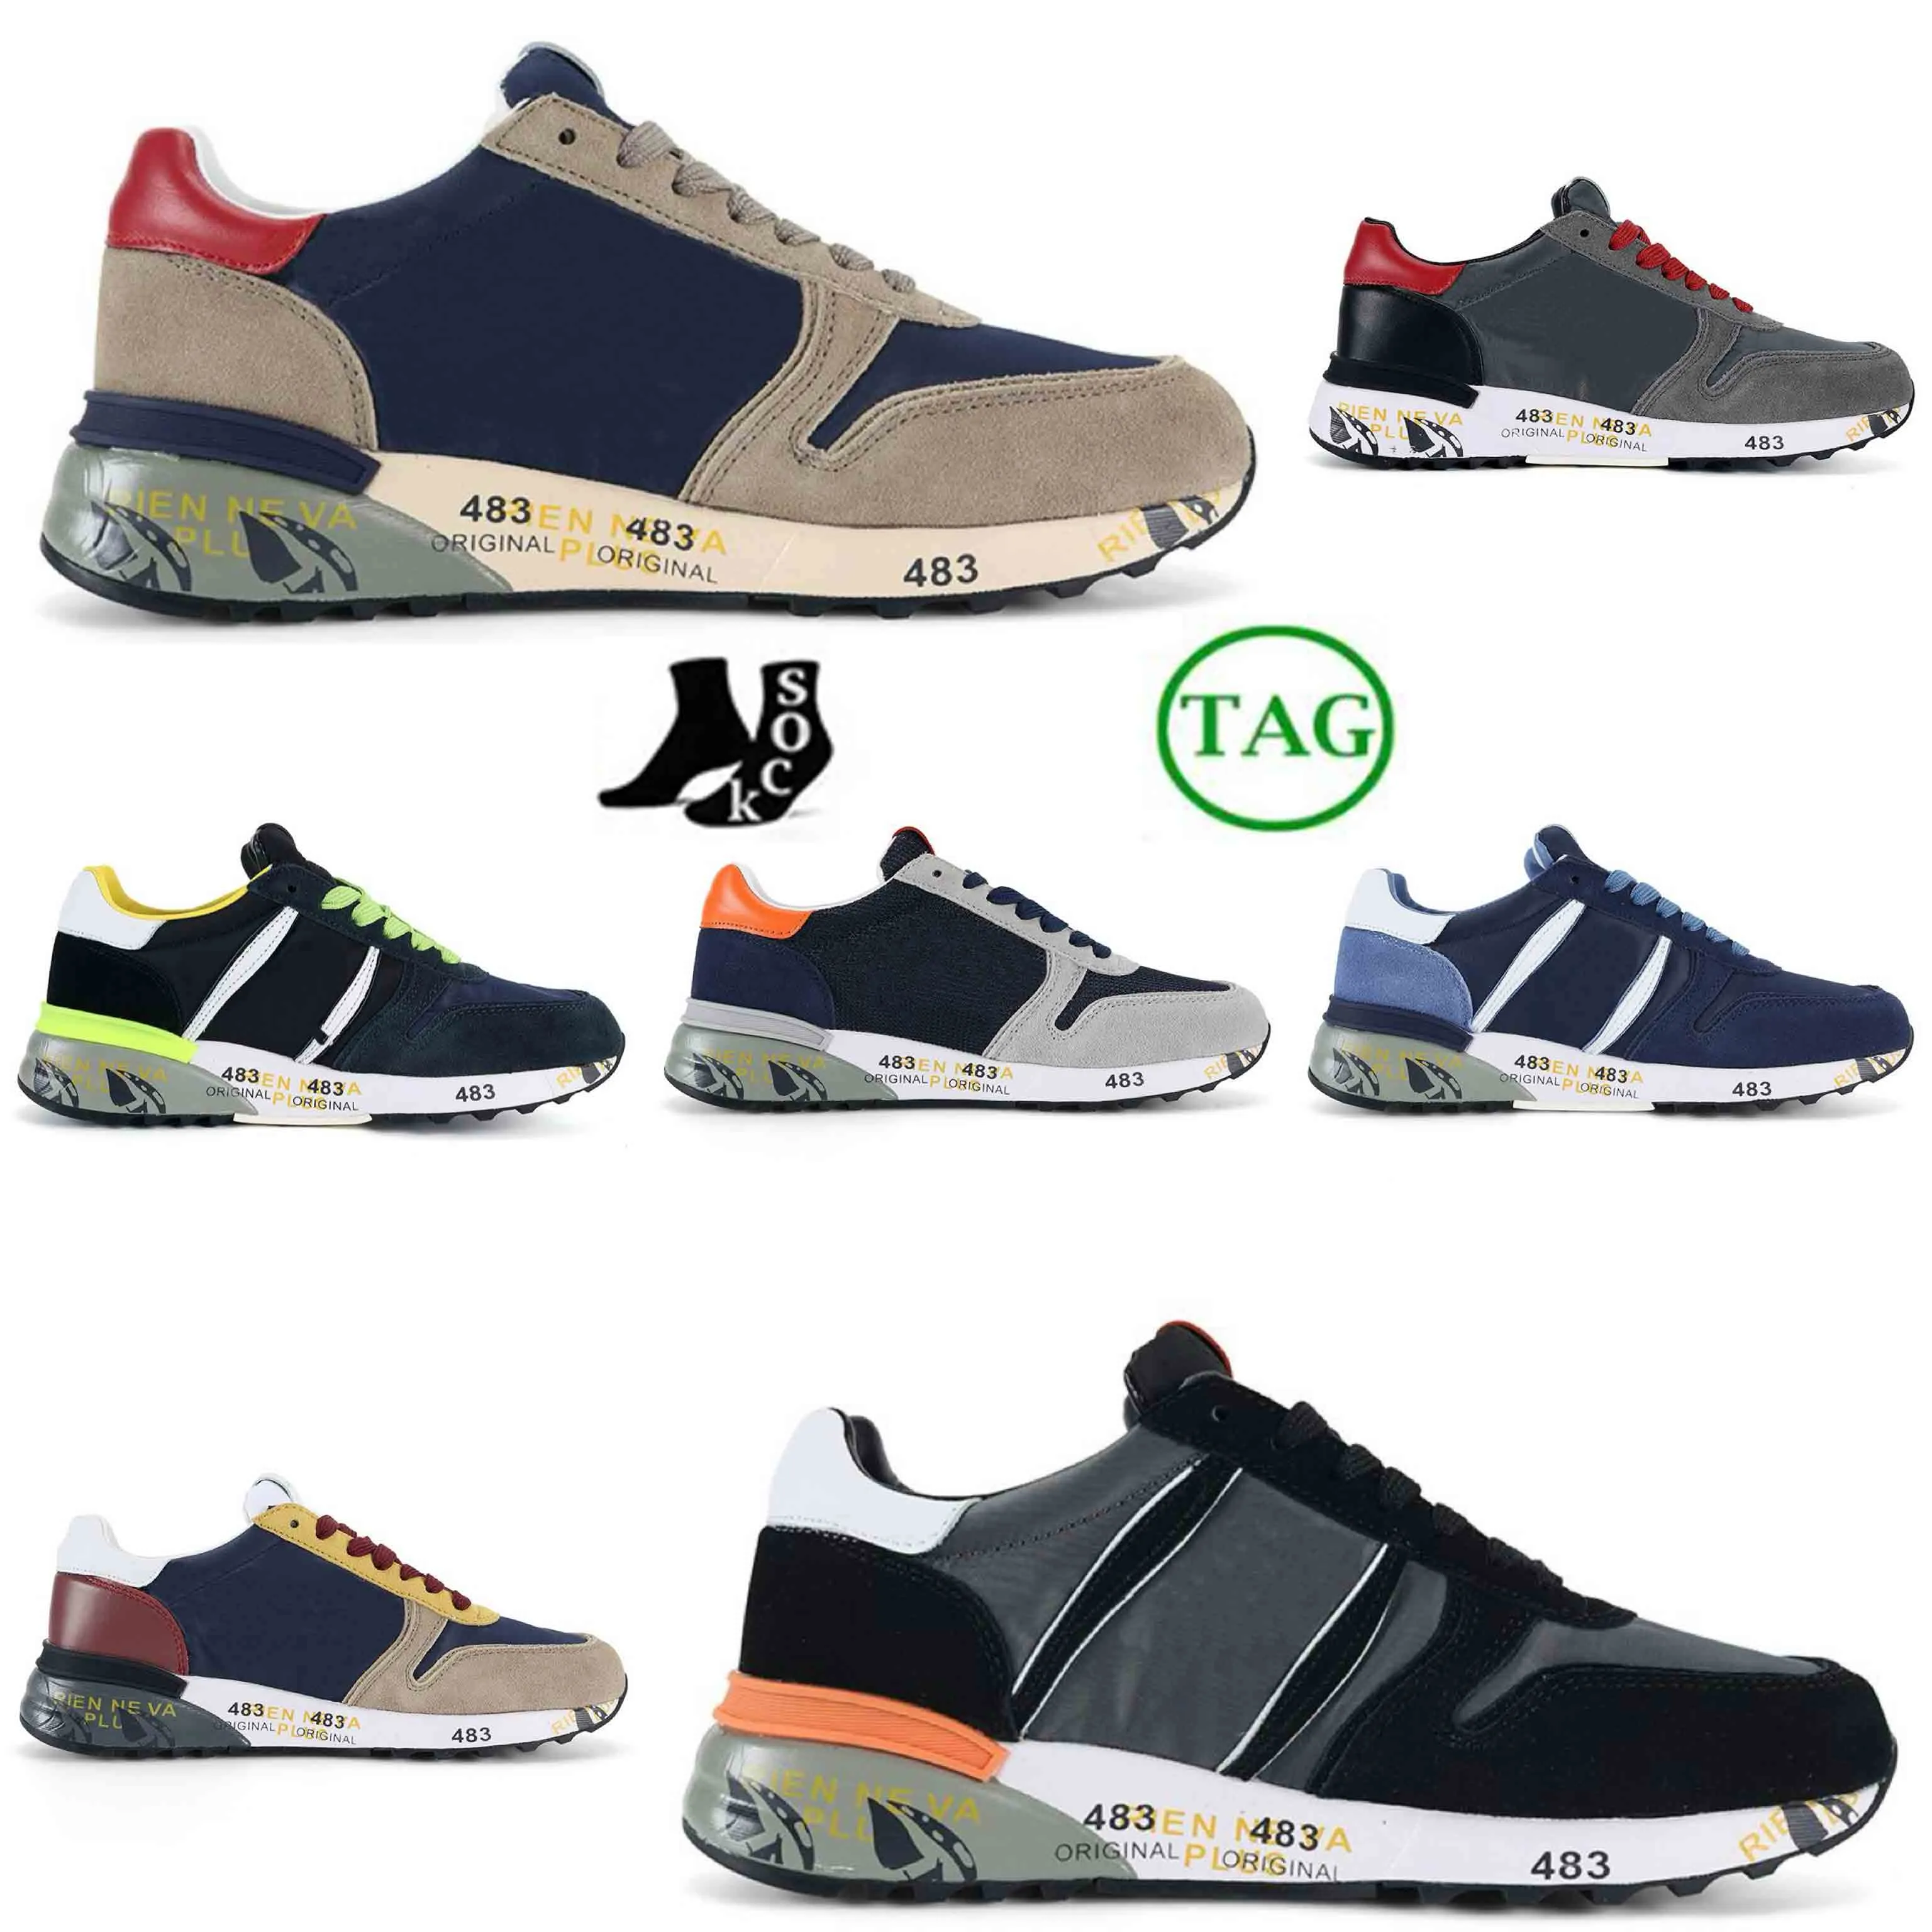 Cuir Hommes Chaussures Casual Sneakers Mode Chaussure Respirant Mesh Anti-slip Sneaker Outdoor Trainers Vintage Trainer Abloh Blanc Vert Rouge Bleu Lettre Plate-Forme